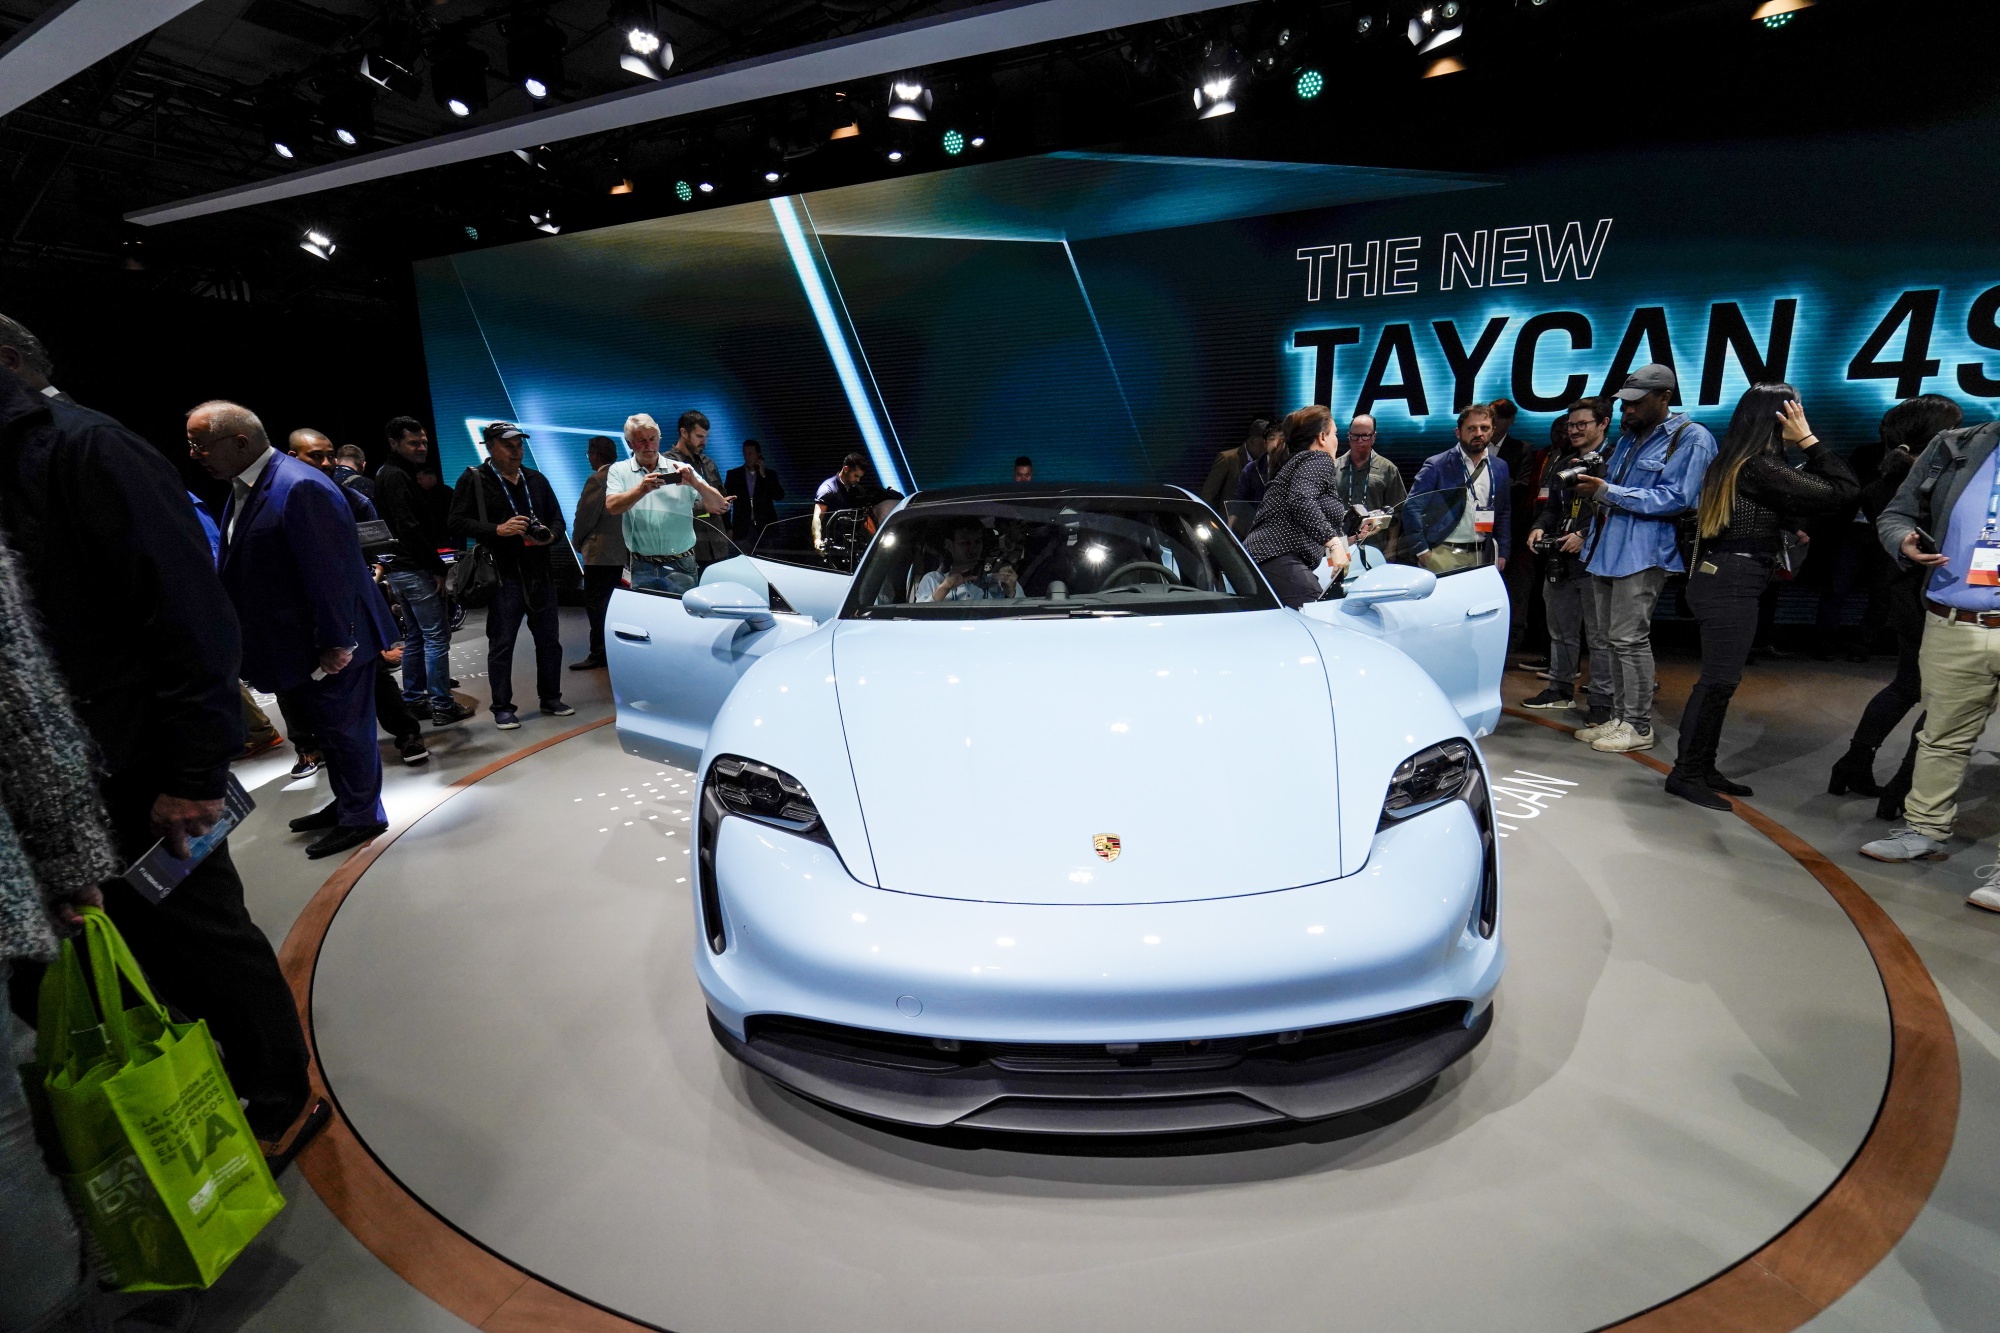 The 2020 Porsche Taycan 4S electric vehicle.